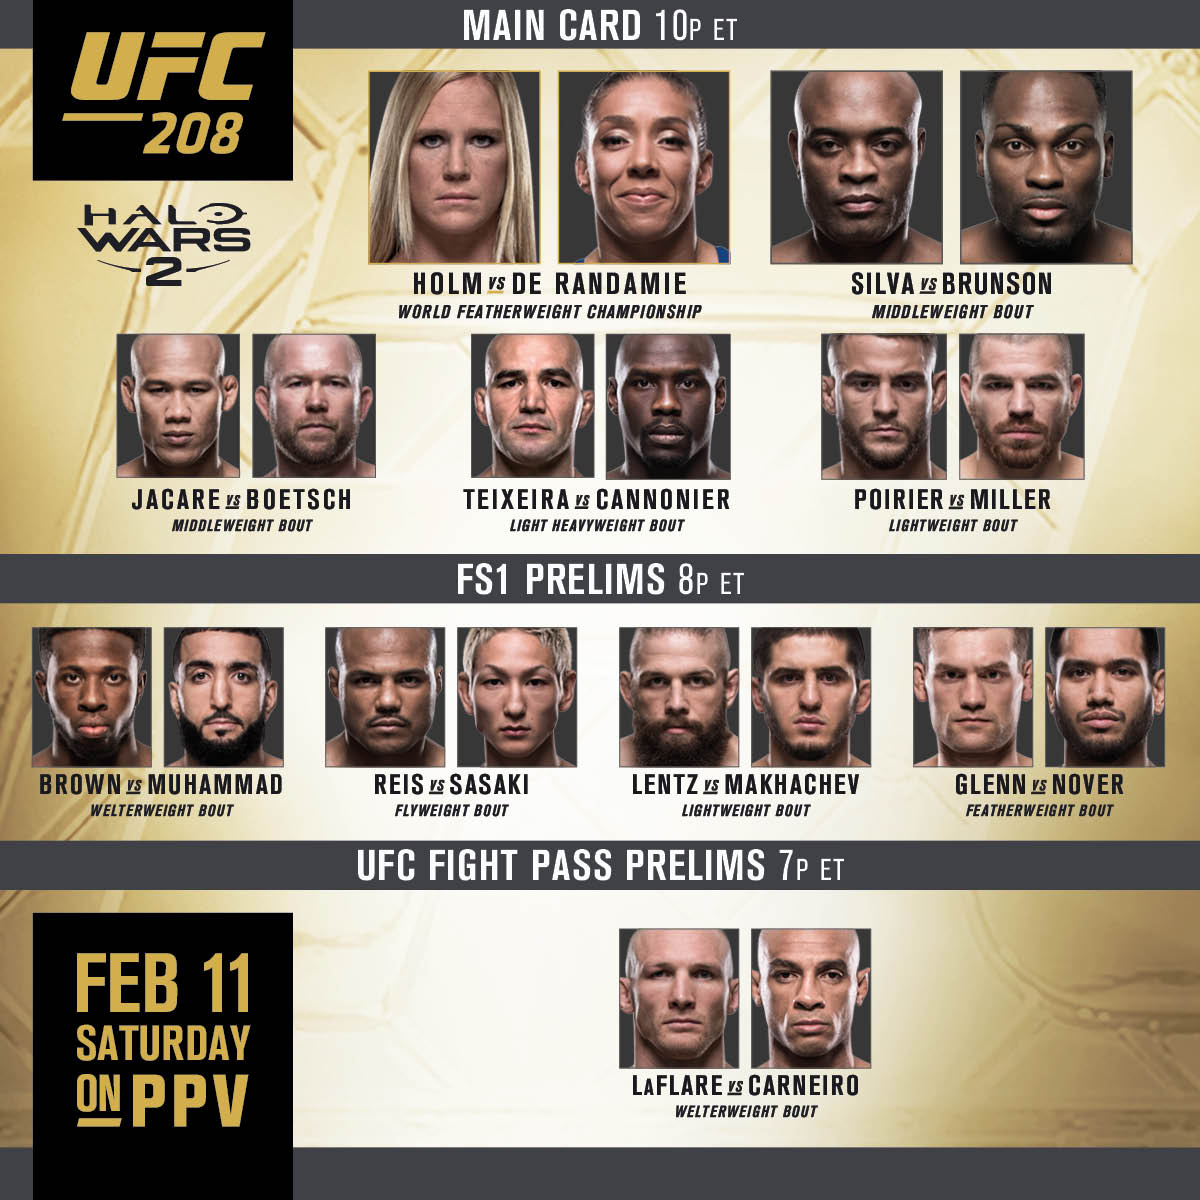 Ufc On Twitter It S Fight Day History Will Be Made Tonight At Ufc208 Fight Card Btyb Halowars2